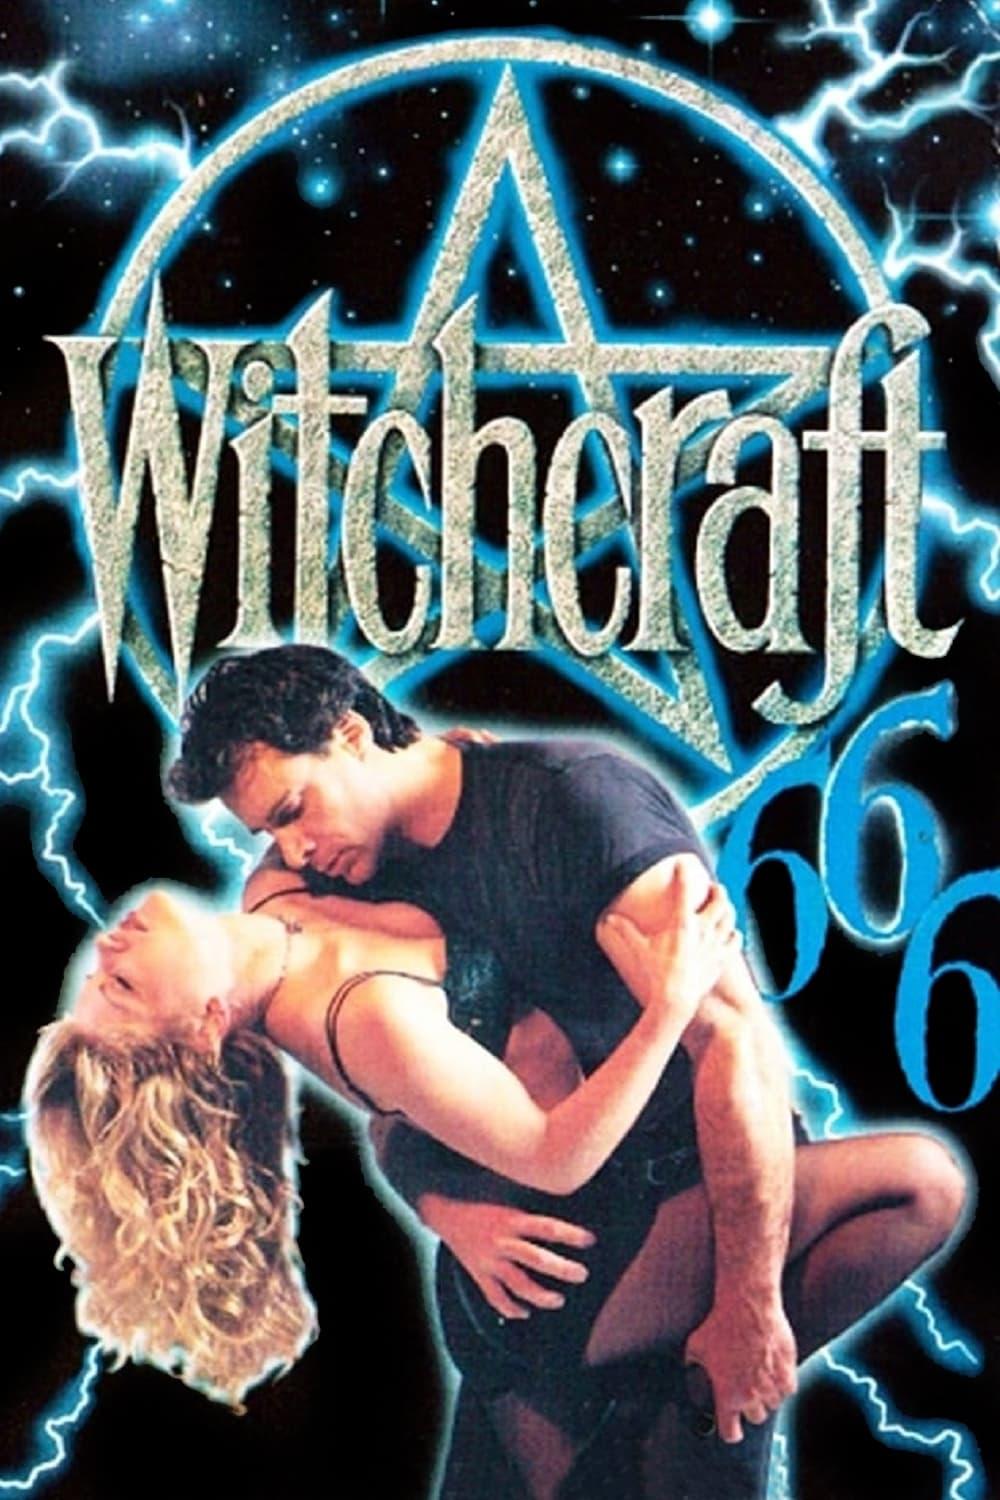 Witchcraft 666: The Devil's Mistress poster